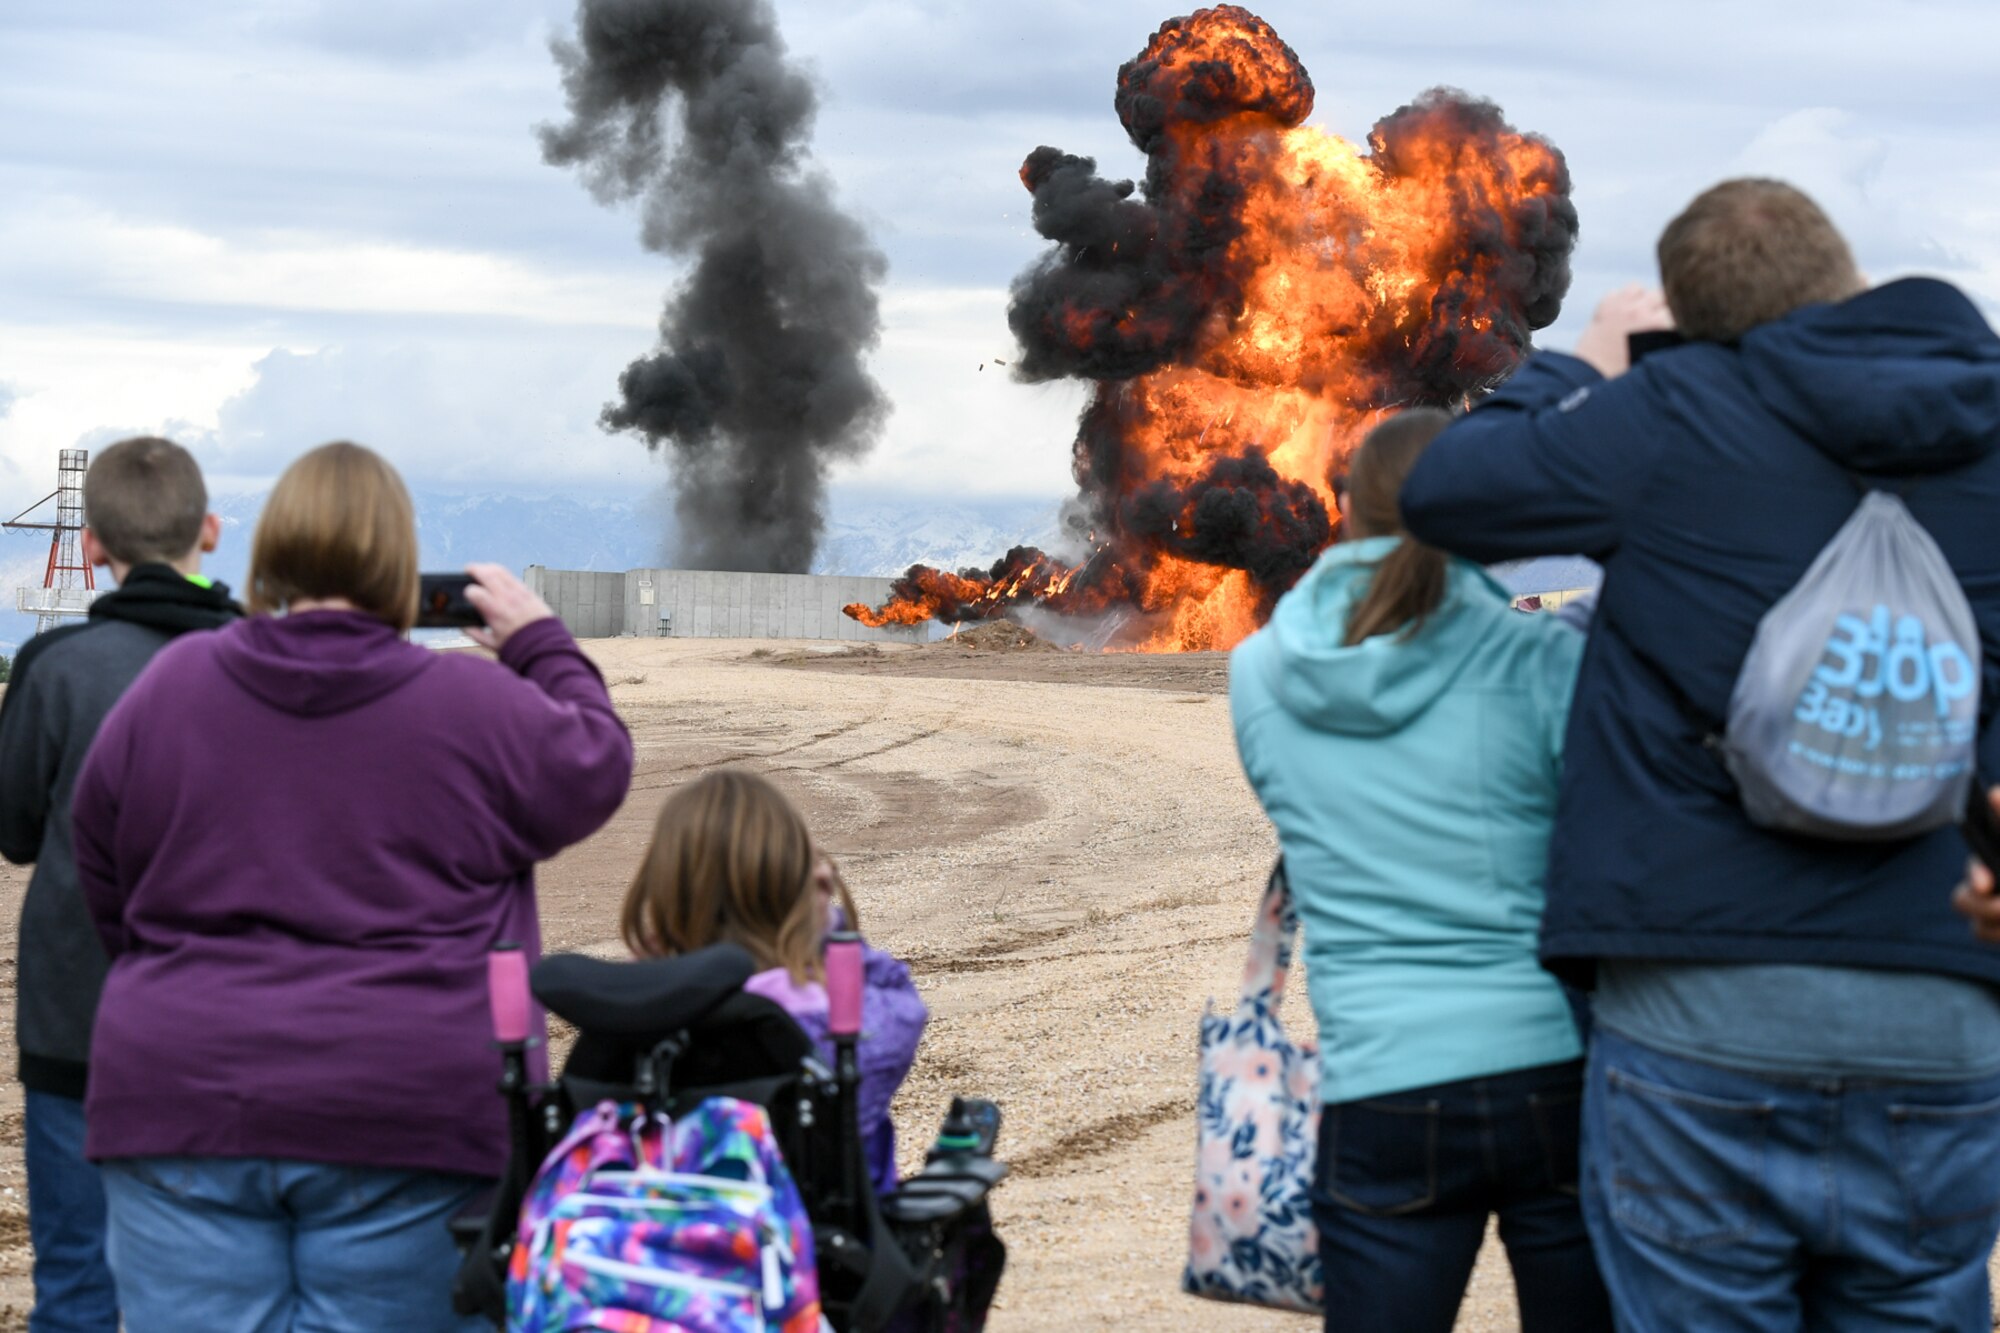 Make-A-Wish Utah children and families witness a controlled detonation during a visit to the 775th Explosive Ordinance Disposal Flight Oct. 11, 2018, at Hill Air Force Base Utah. The visit was part of a 75th Air Base Wing-hosted base tour for Make-A-Wish. (U.S. Air Force photo by Cynthia Griggs)